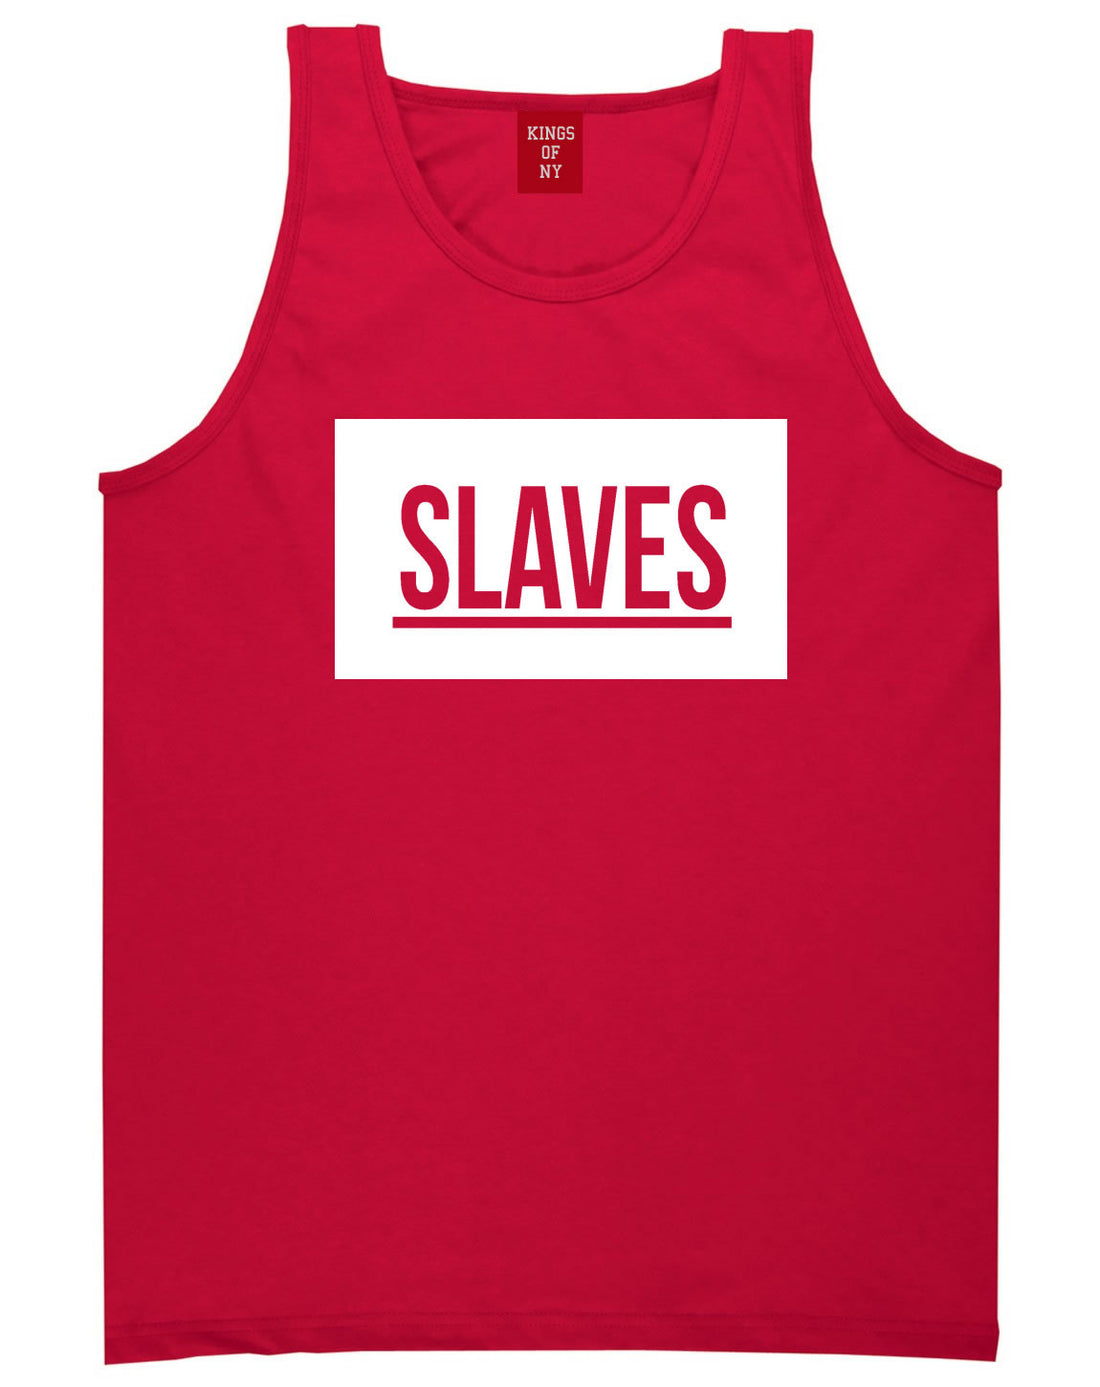 Slaves Fashion Kanye Lyrics Music West East Tank Top In Red by Kings Of NY